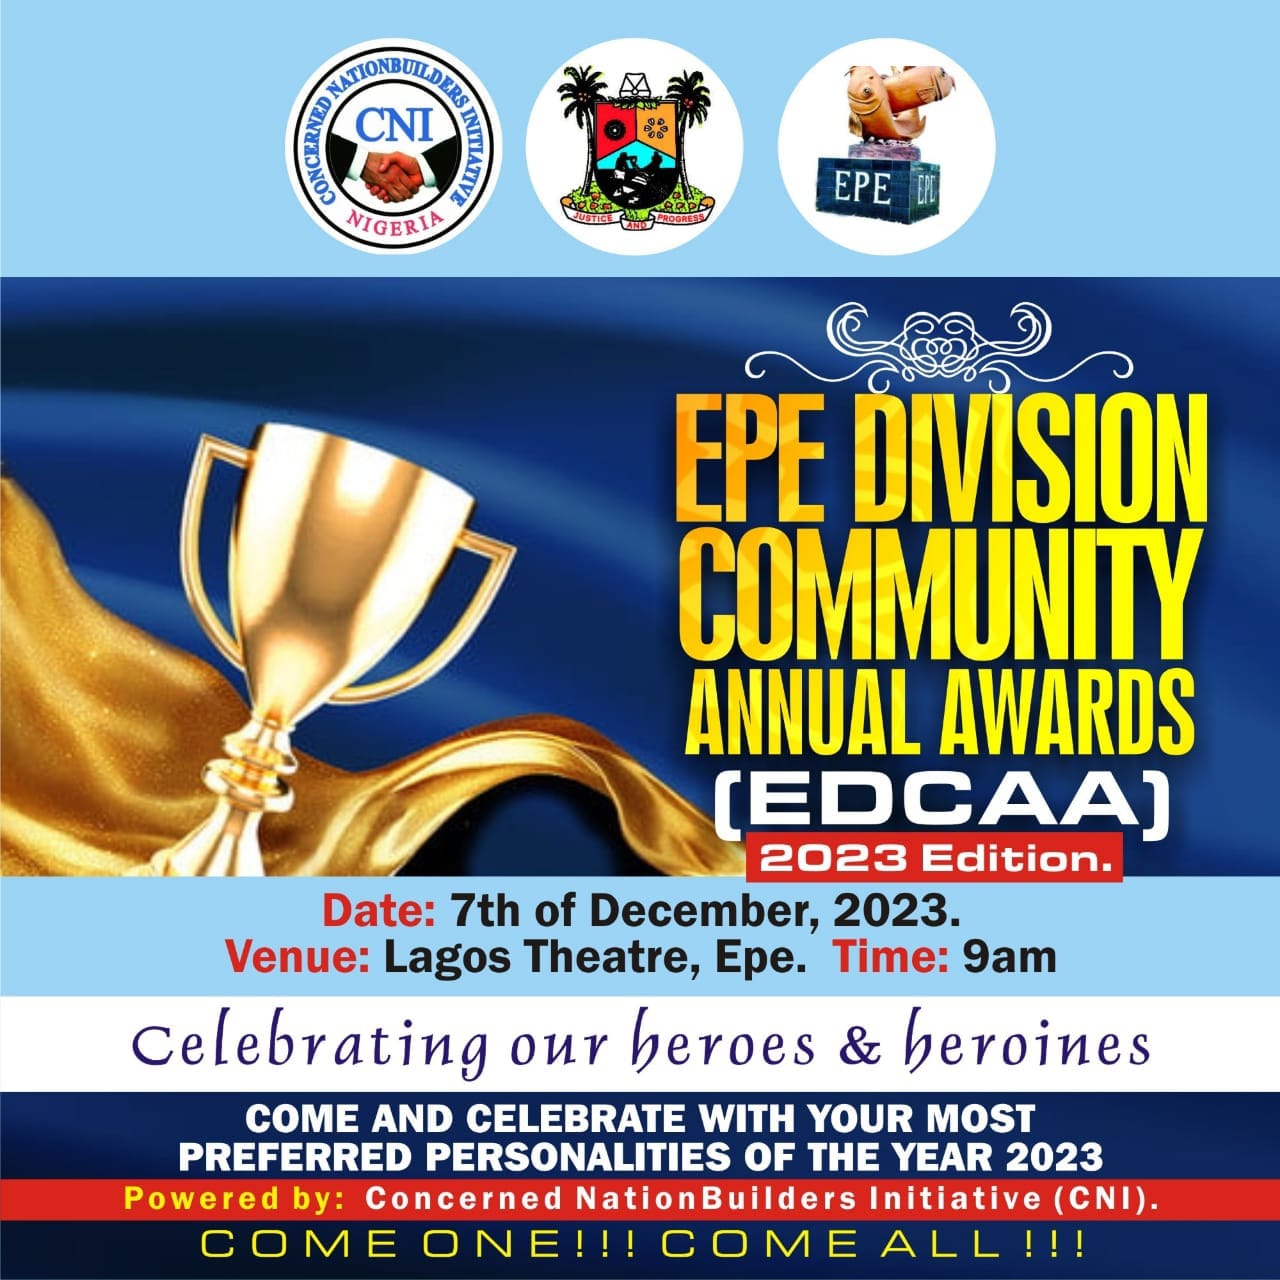 Epe Division Community Annual Awards 2023: Thrills, Controversies, and Triumphs Mark Historic Event